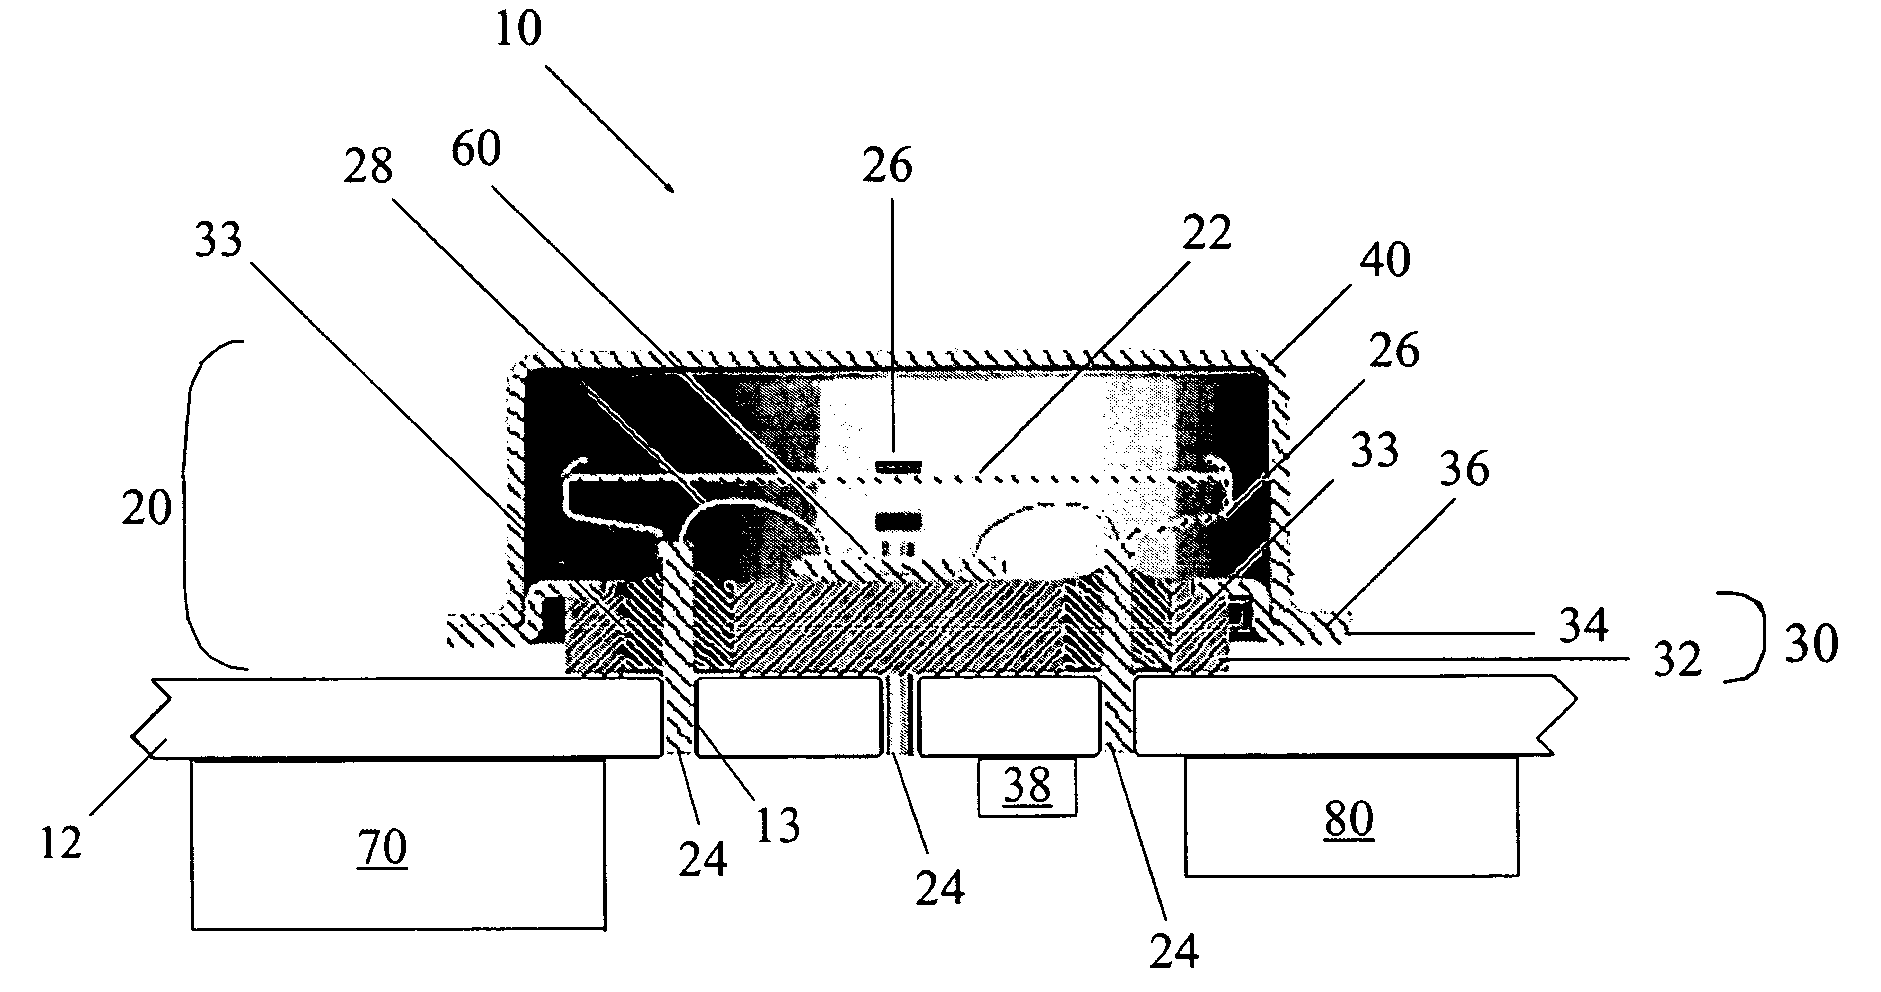 Quartz resonator package having a housing with thermally coupled internal heating element